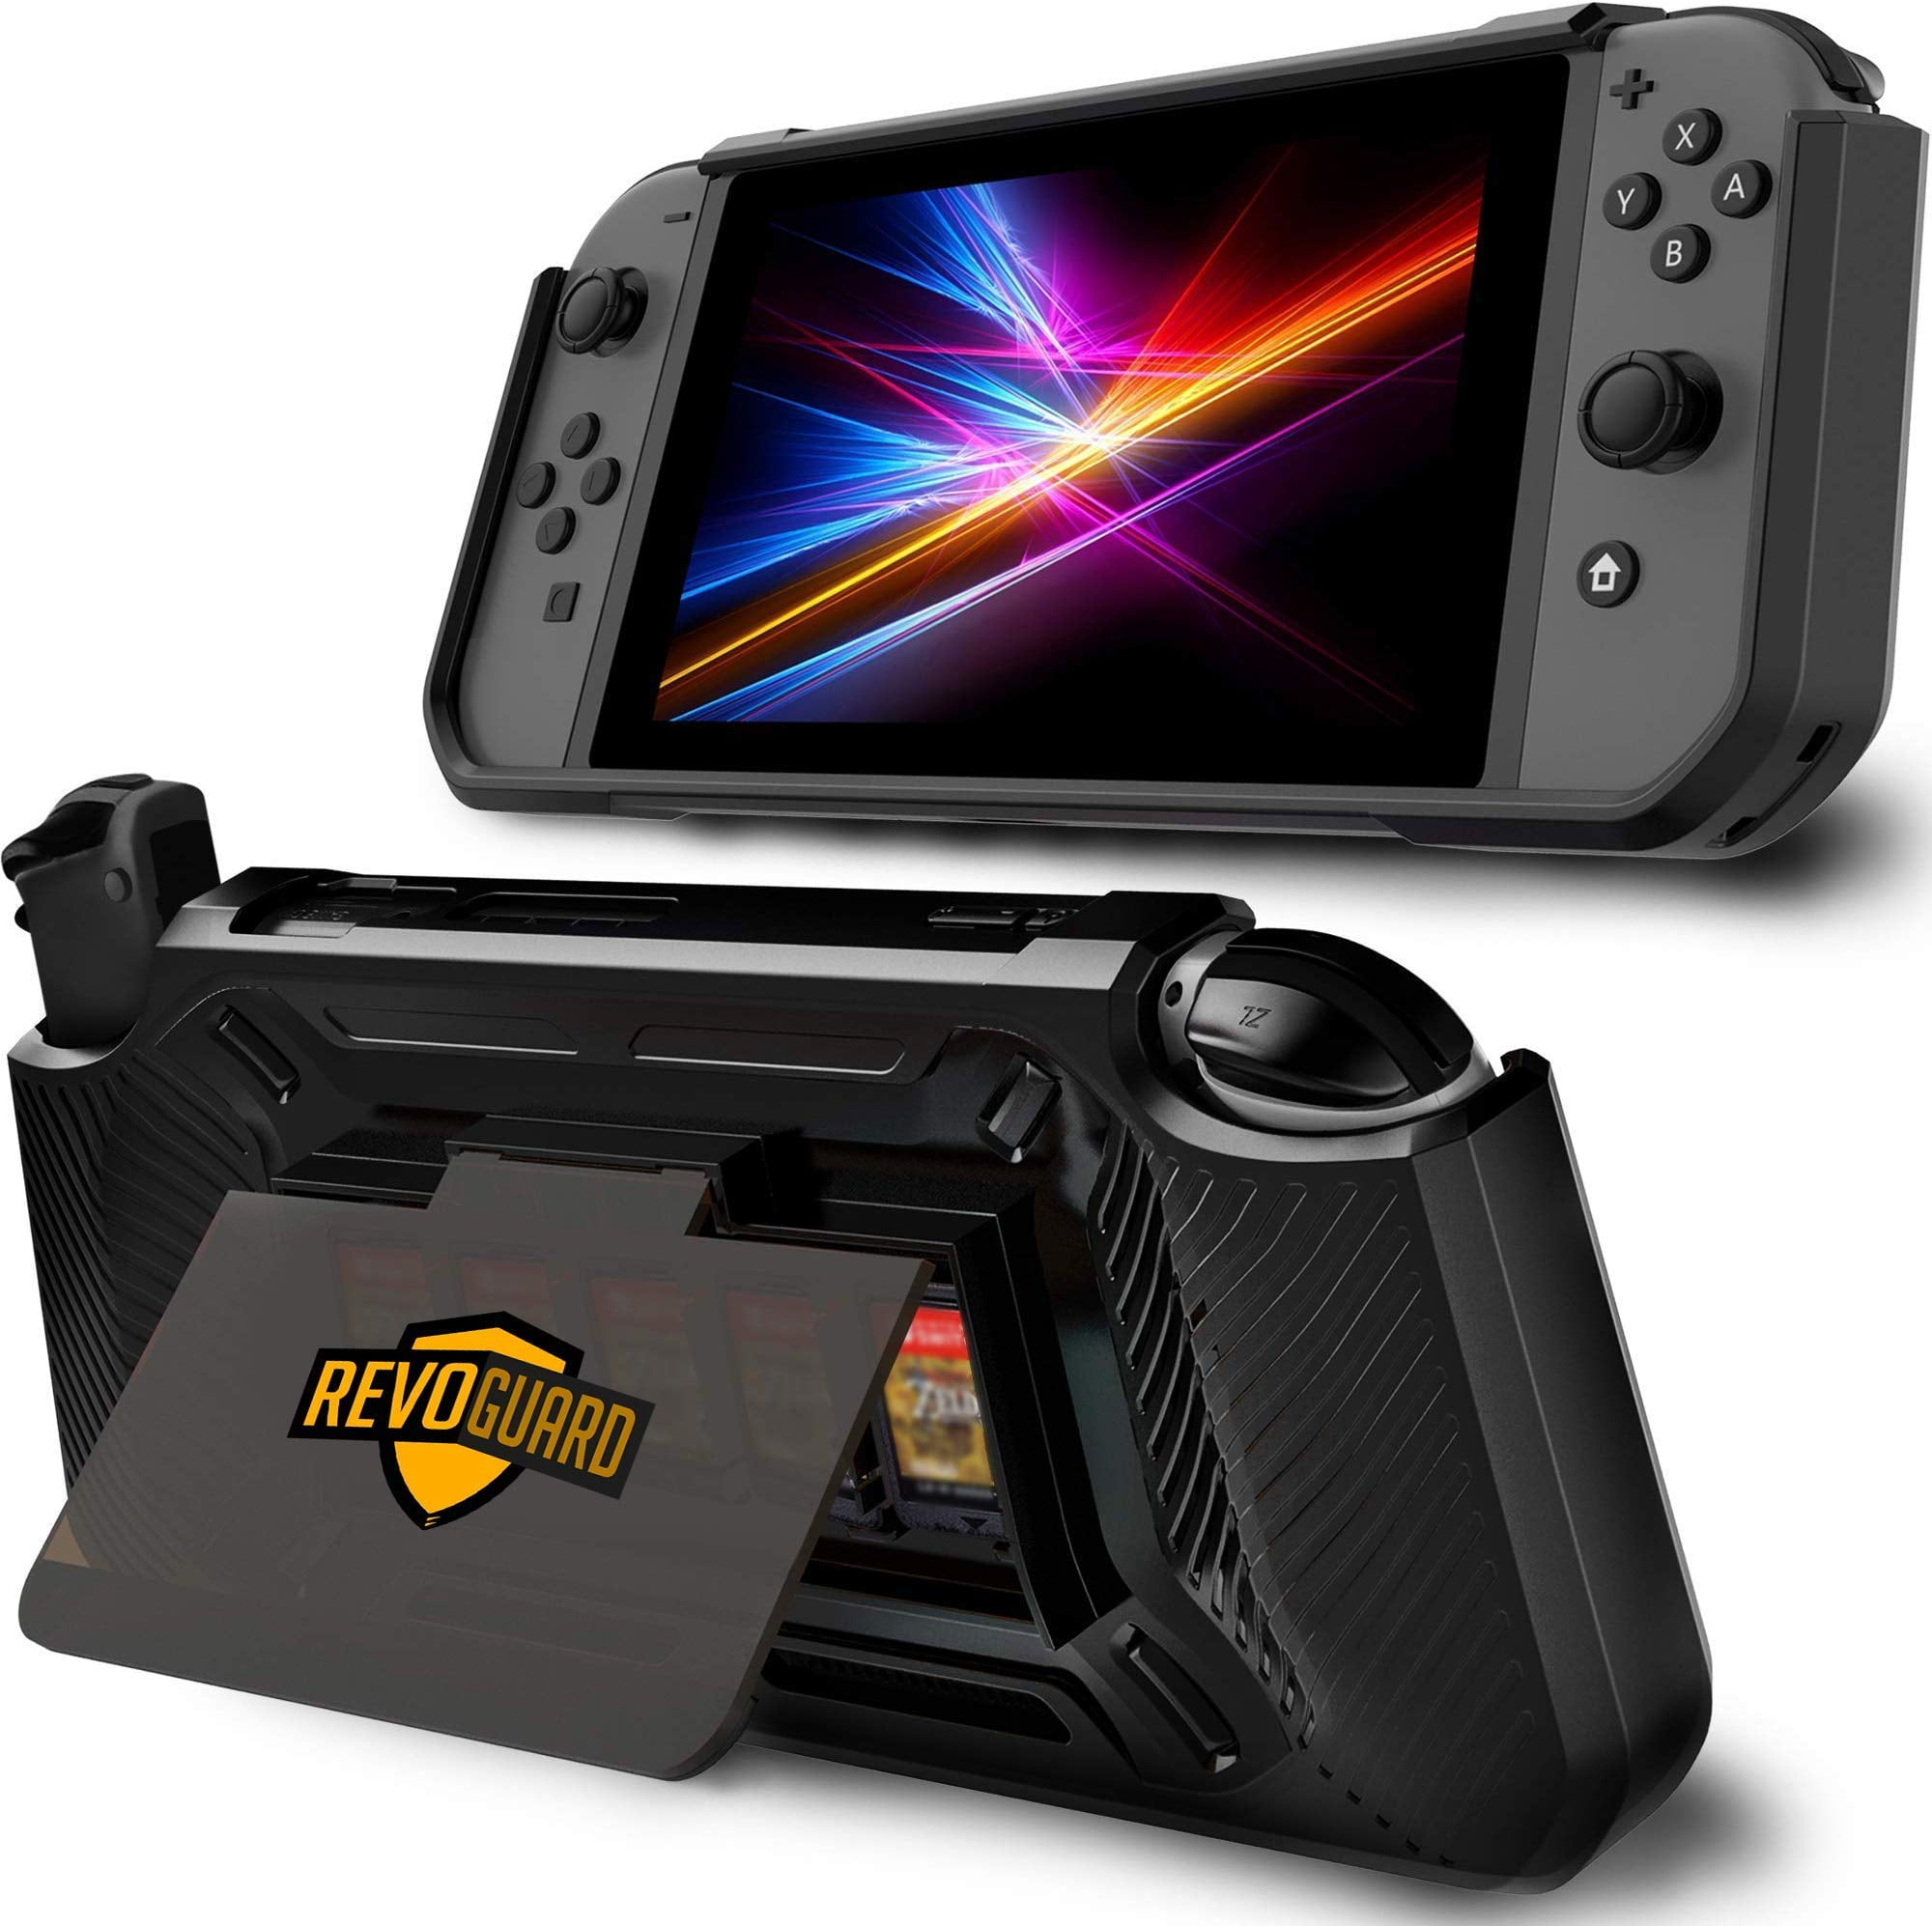 RevoGuard Switch Case for Nintendo with Stand [Stores 5 Games] Slim Compact  Multi Angle Protective Carry Cover Holder - Black [2019 Model]